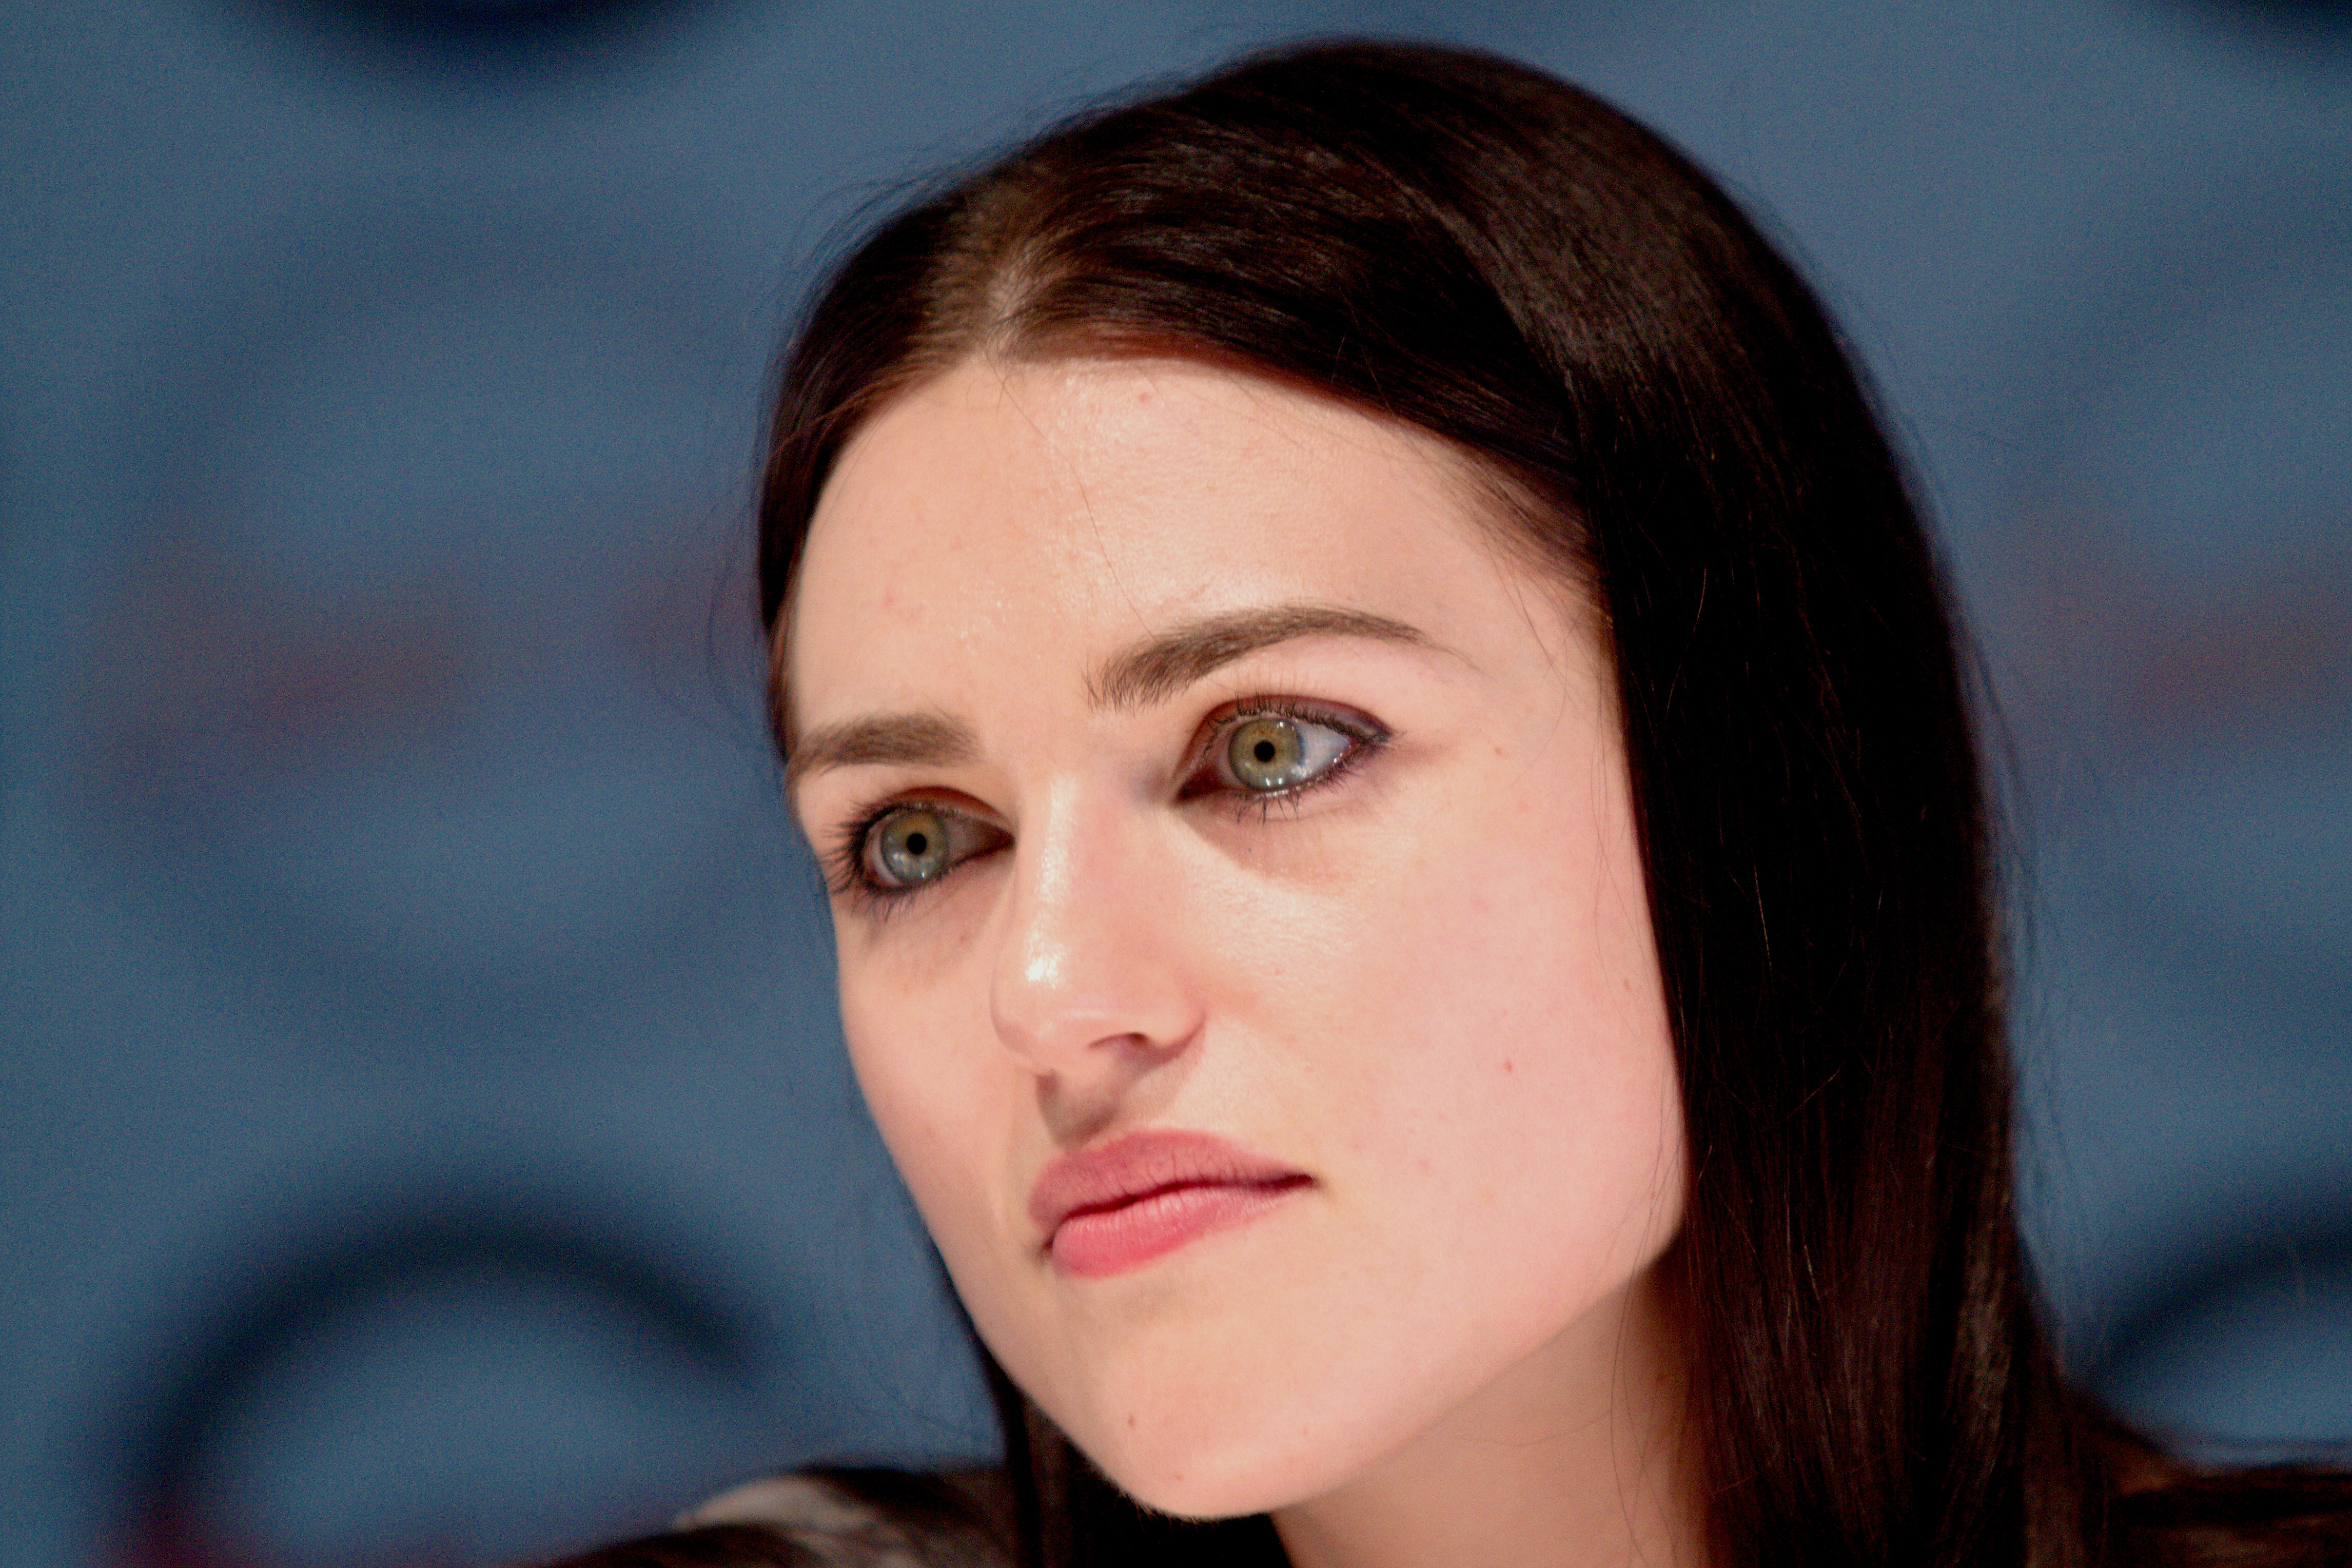 Does Irish actress Katie McGrath pass better in UK or Germany? 